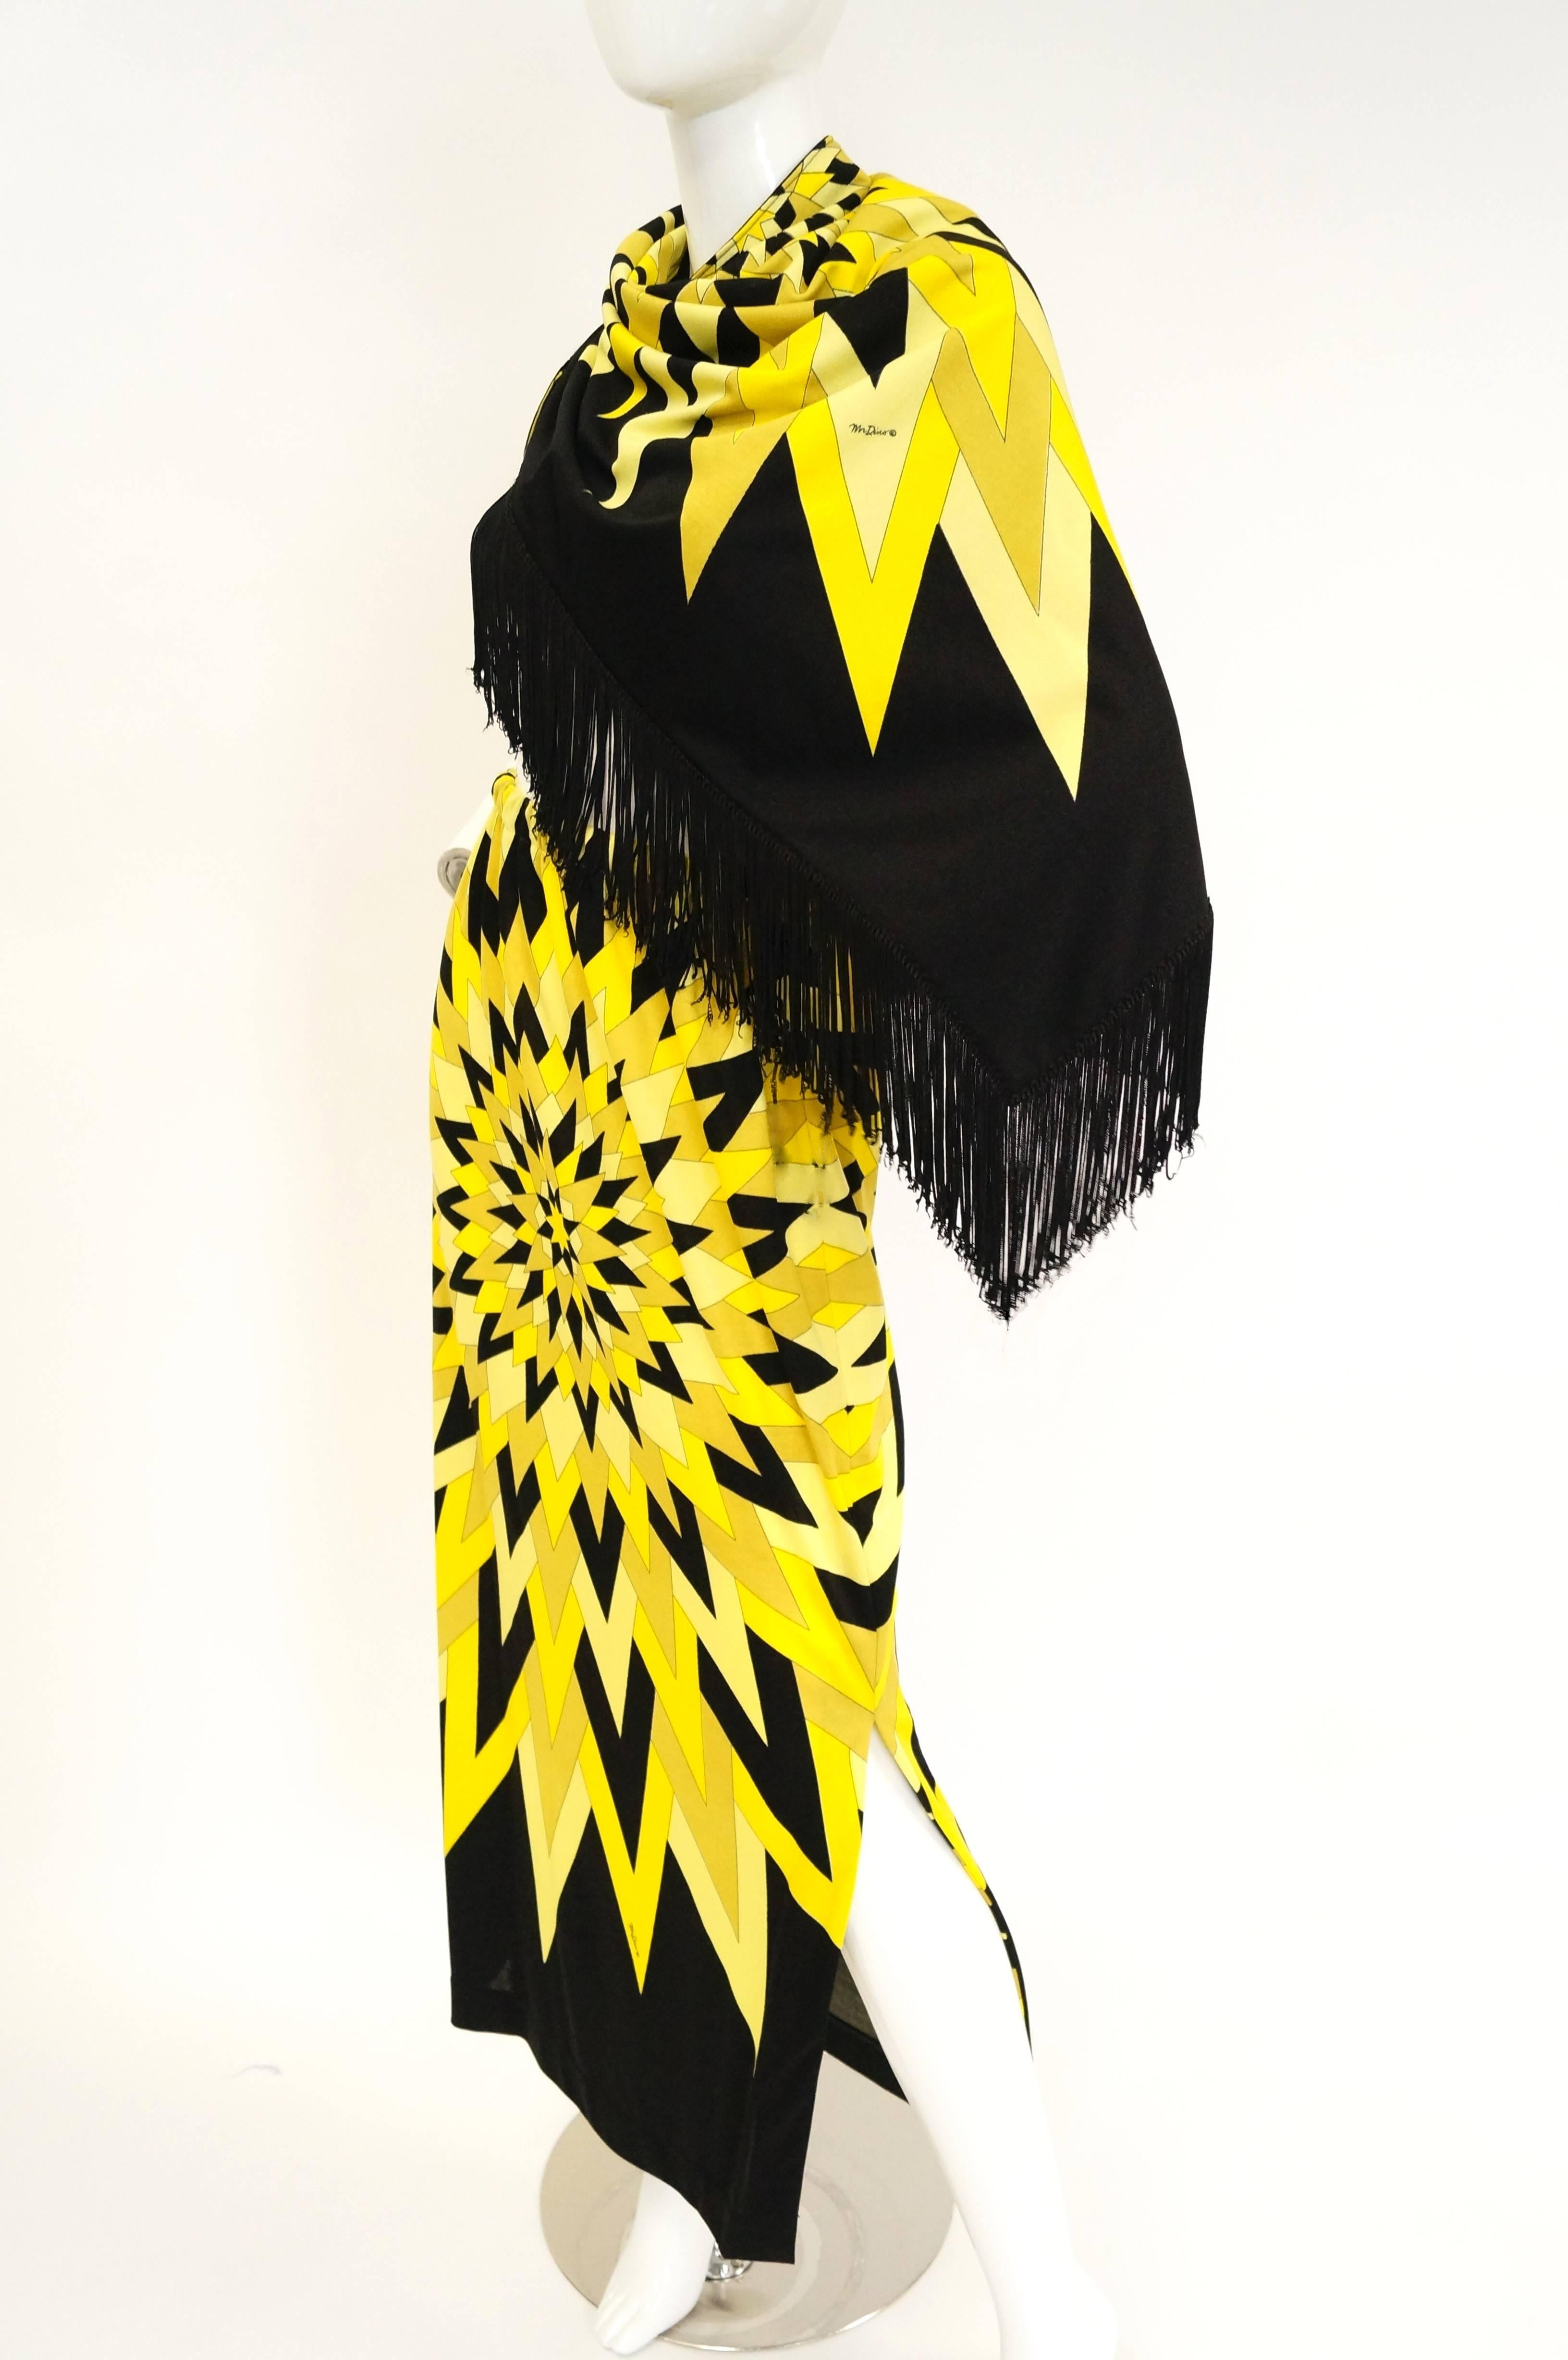 Outshine the sun in this sensational ensemble by Mr. Dino! The jersey knit ensemble includes a long sheath skirt with elastic waist and a dramatic long - fringe shawl. Both pieces are emblazoned with an amazing contrasting black and yellow geometric